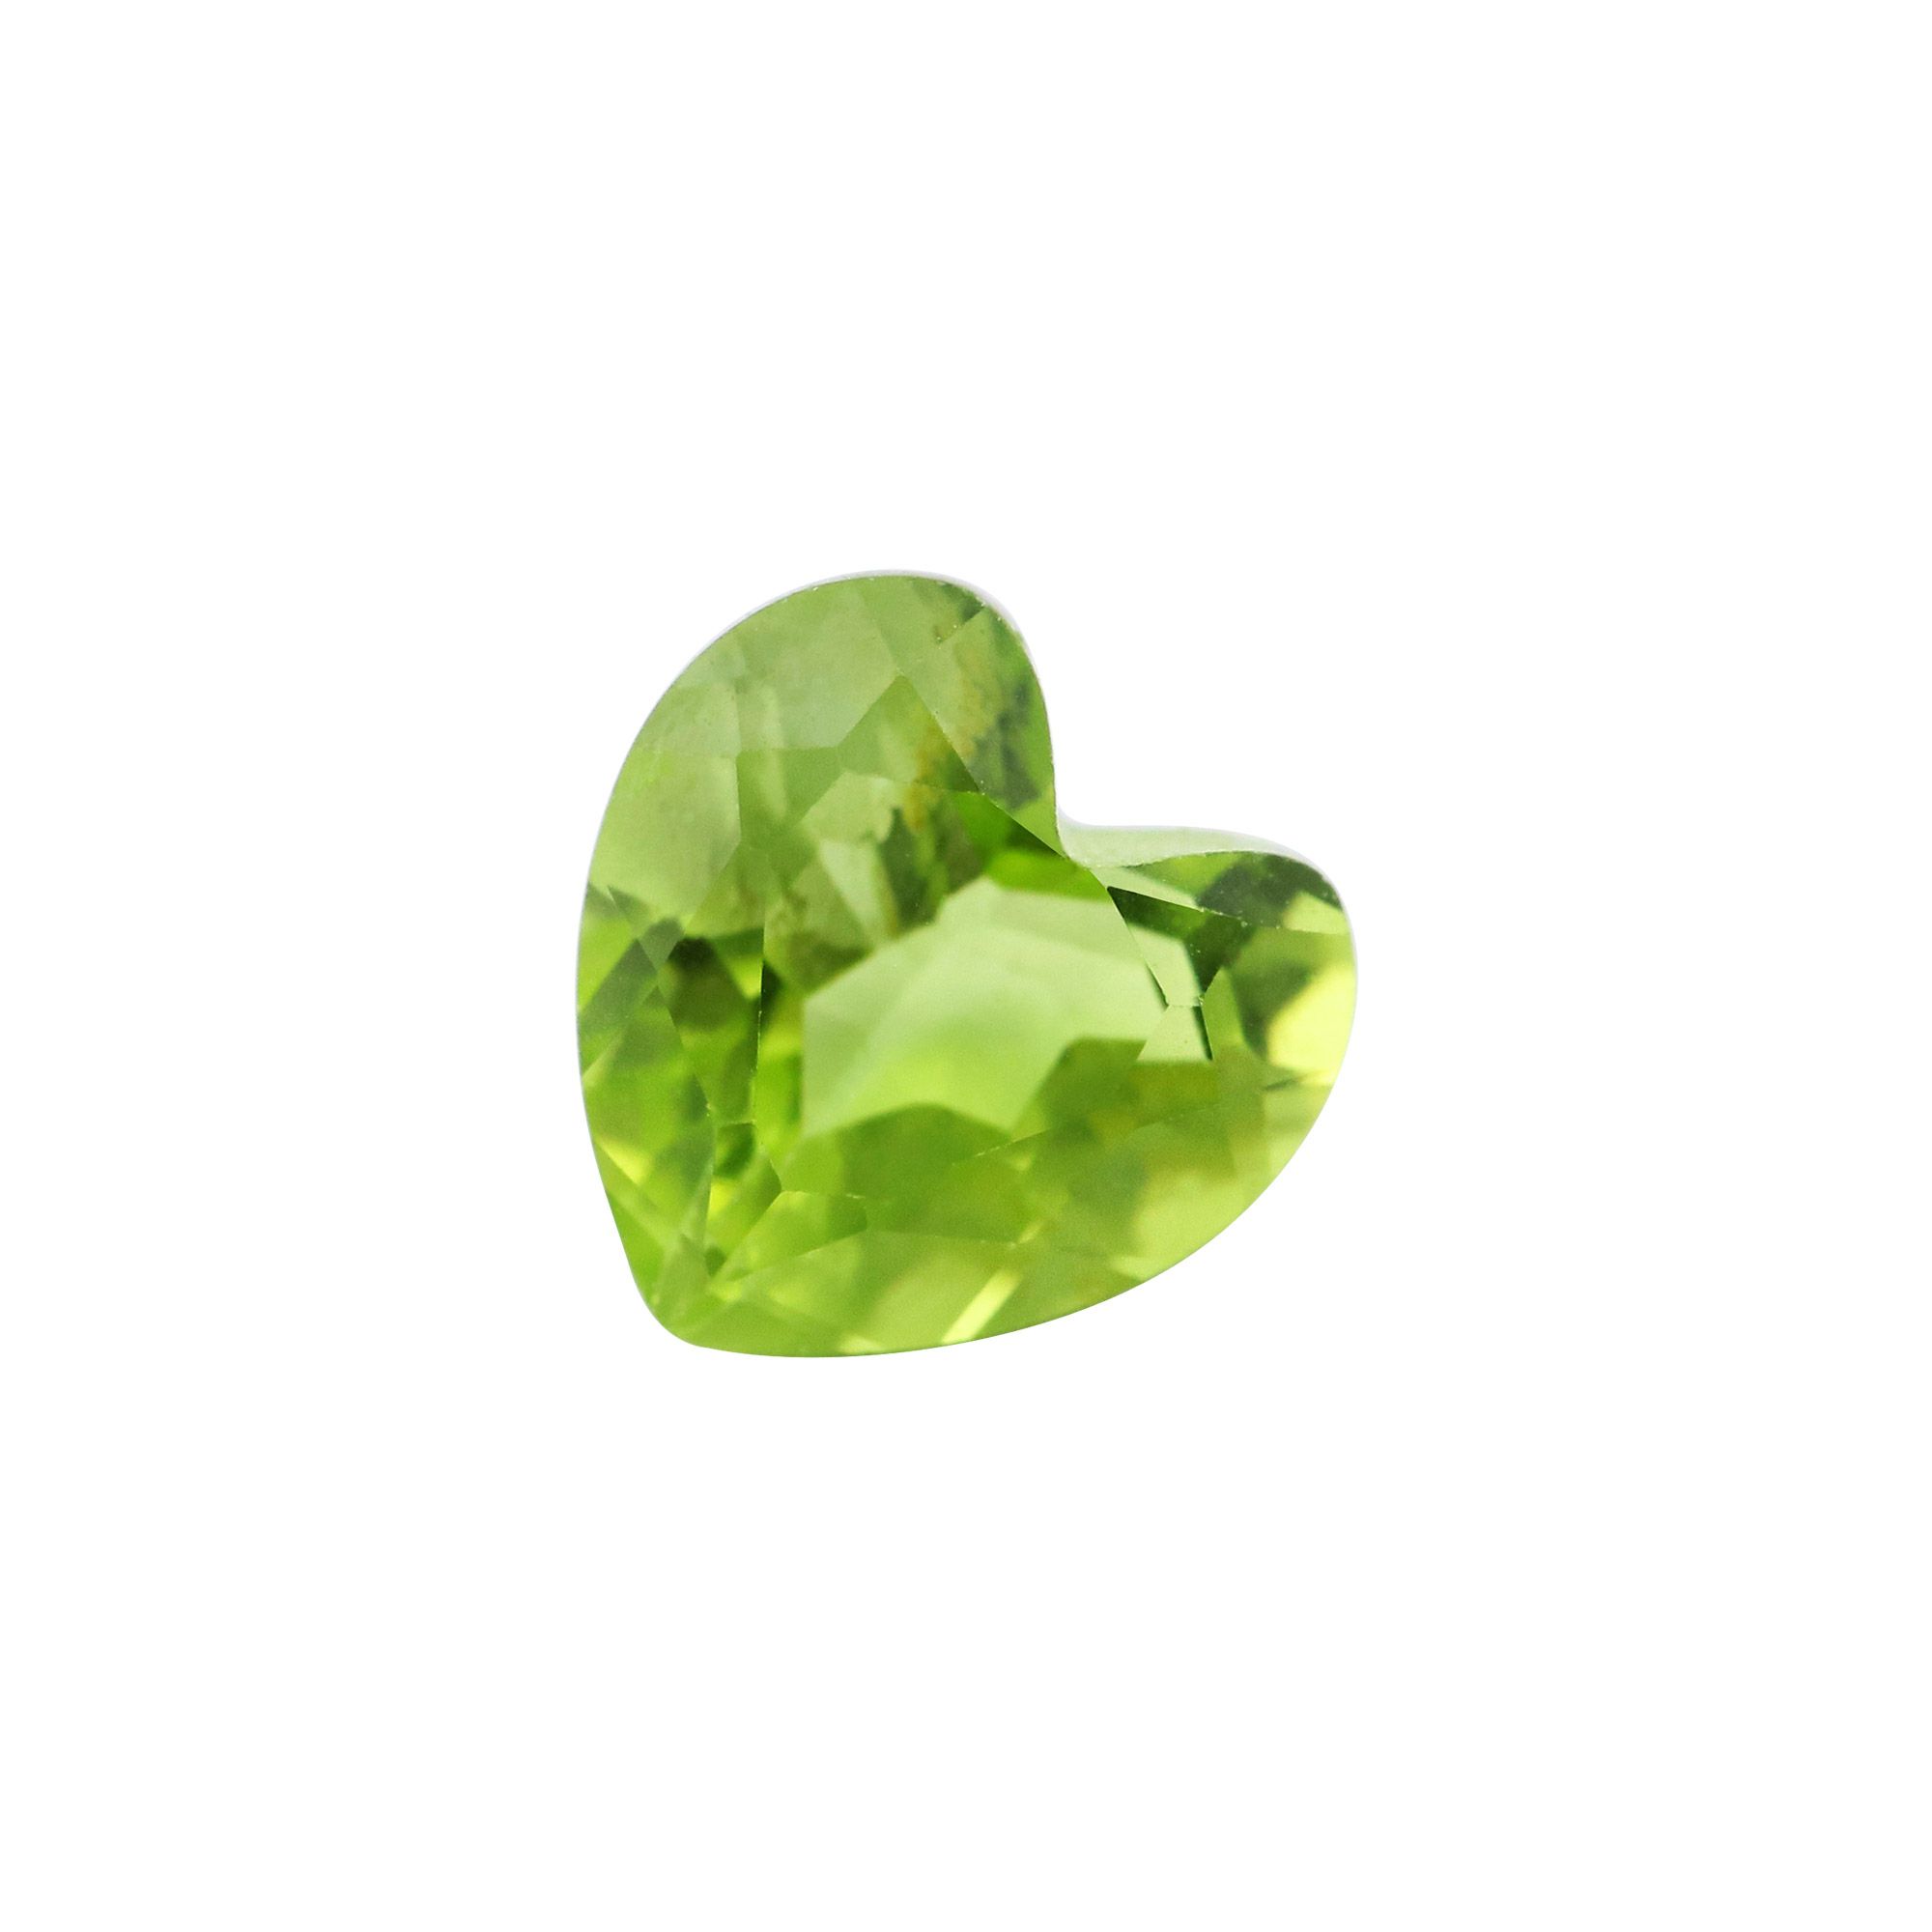 1Pcs 4-8MM Heart Green Peridot August Birthstone Faceted Cut Loose Gemstone Natural Semi Precious Stone DIY Jewelry Supplies 4130010 - Click Image to Close